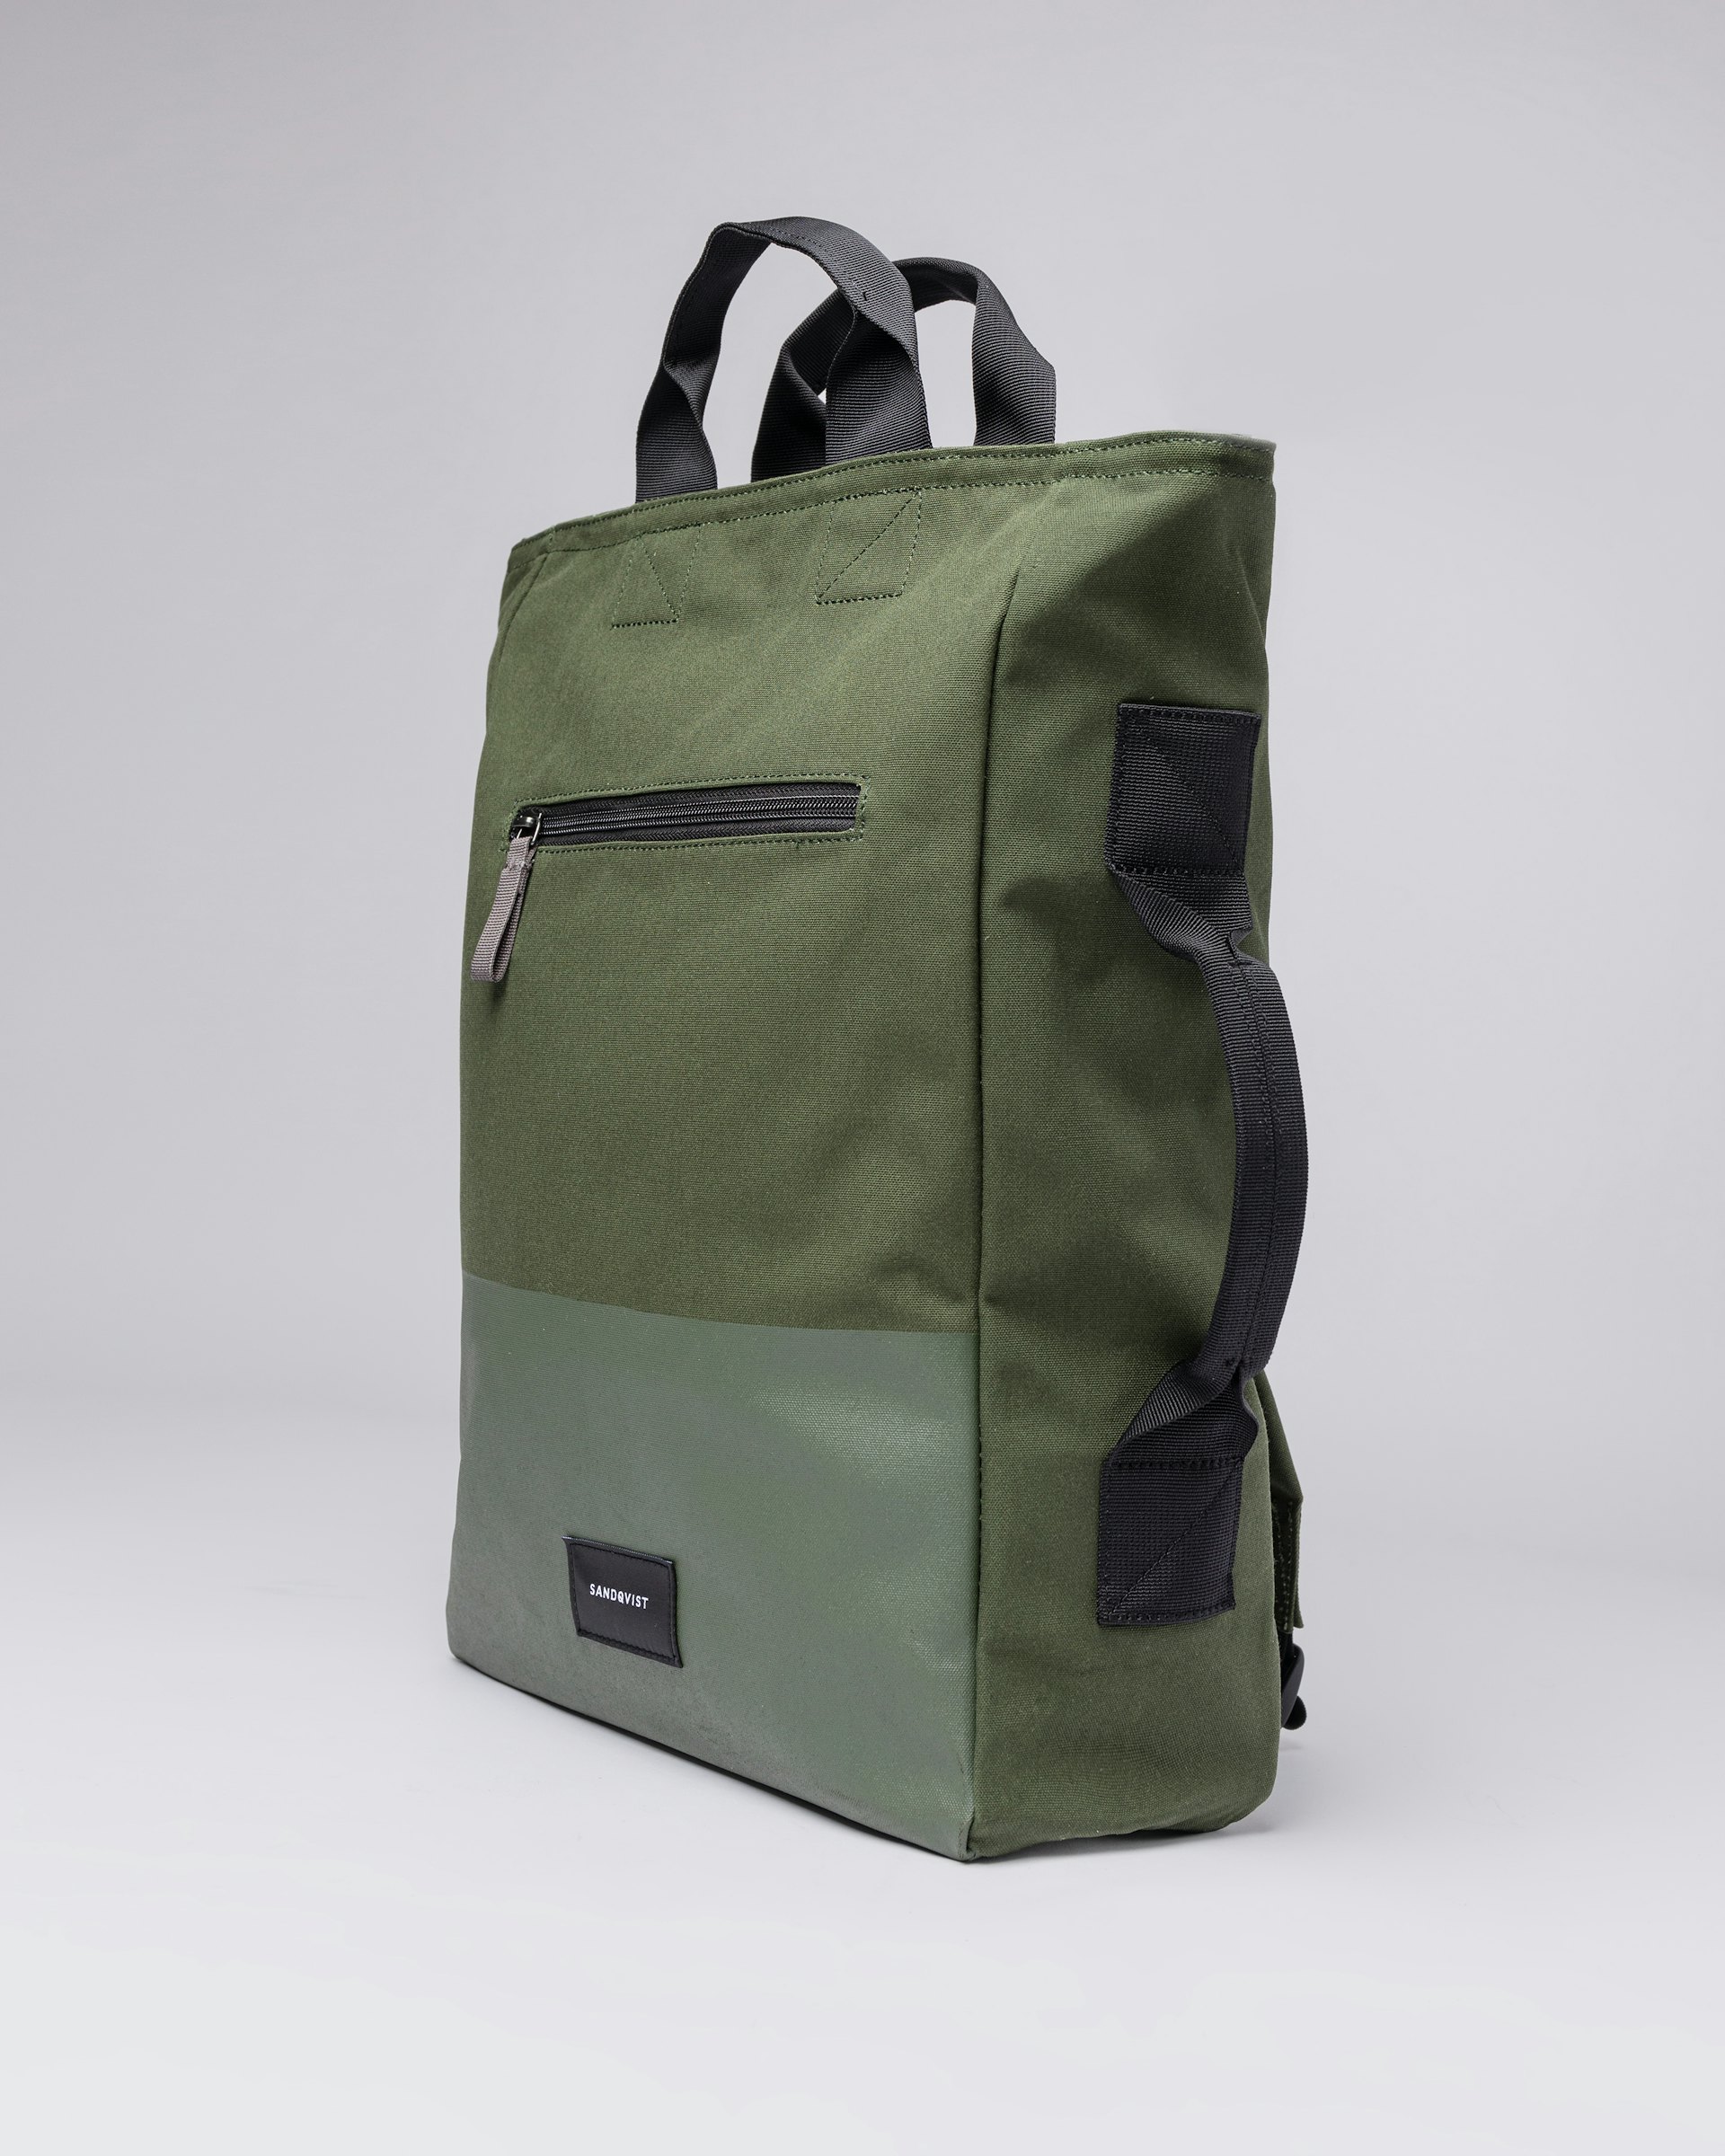 Tony vegan belongs to the category Backpacks and is in color dawn green (3 of 5)